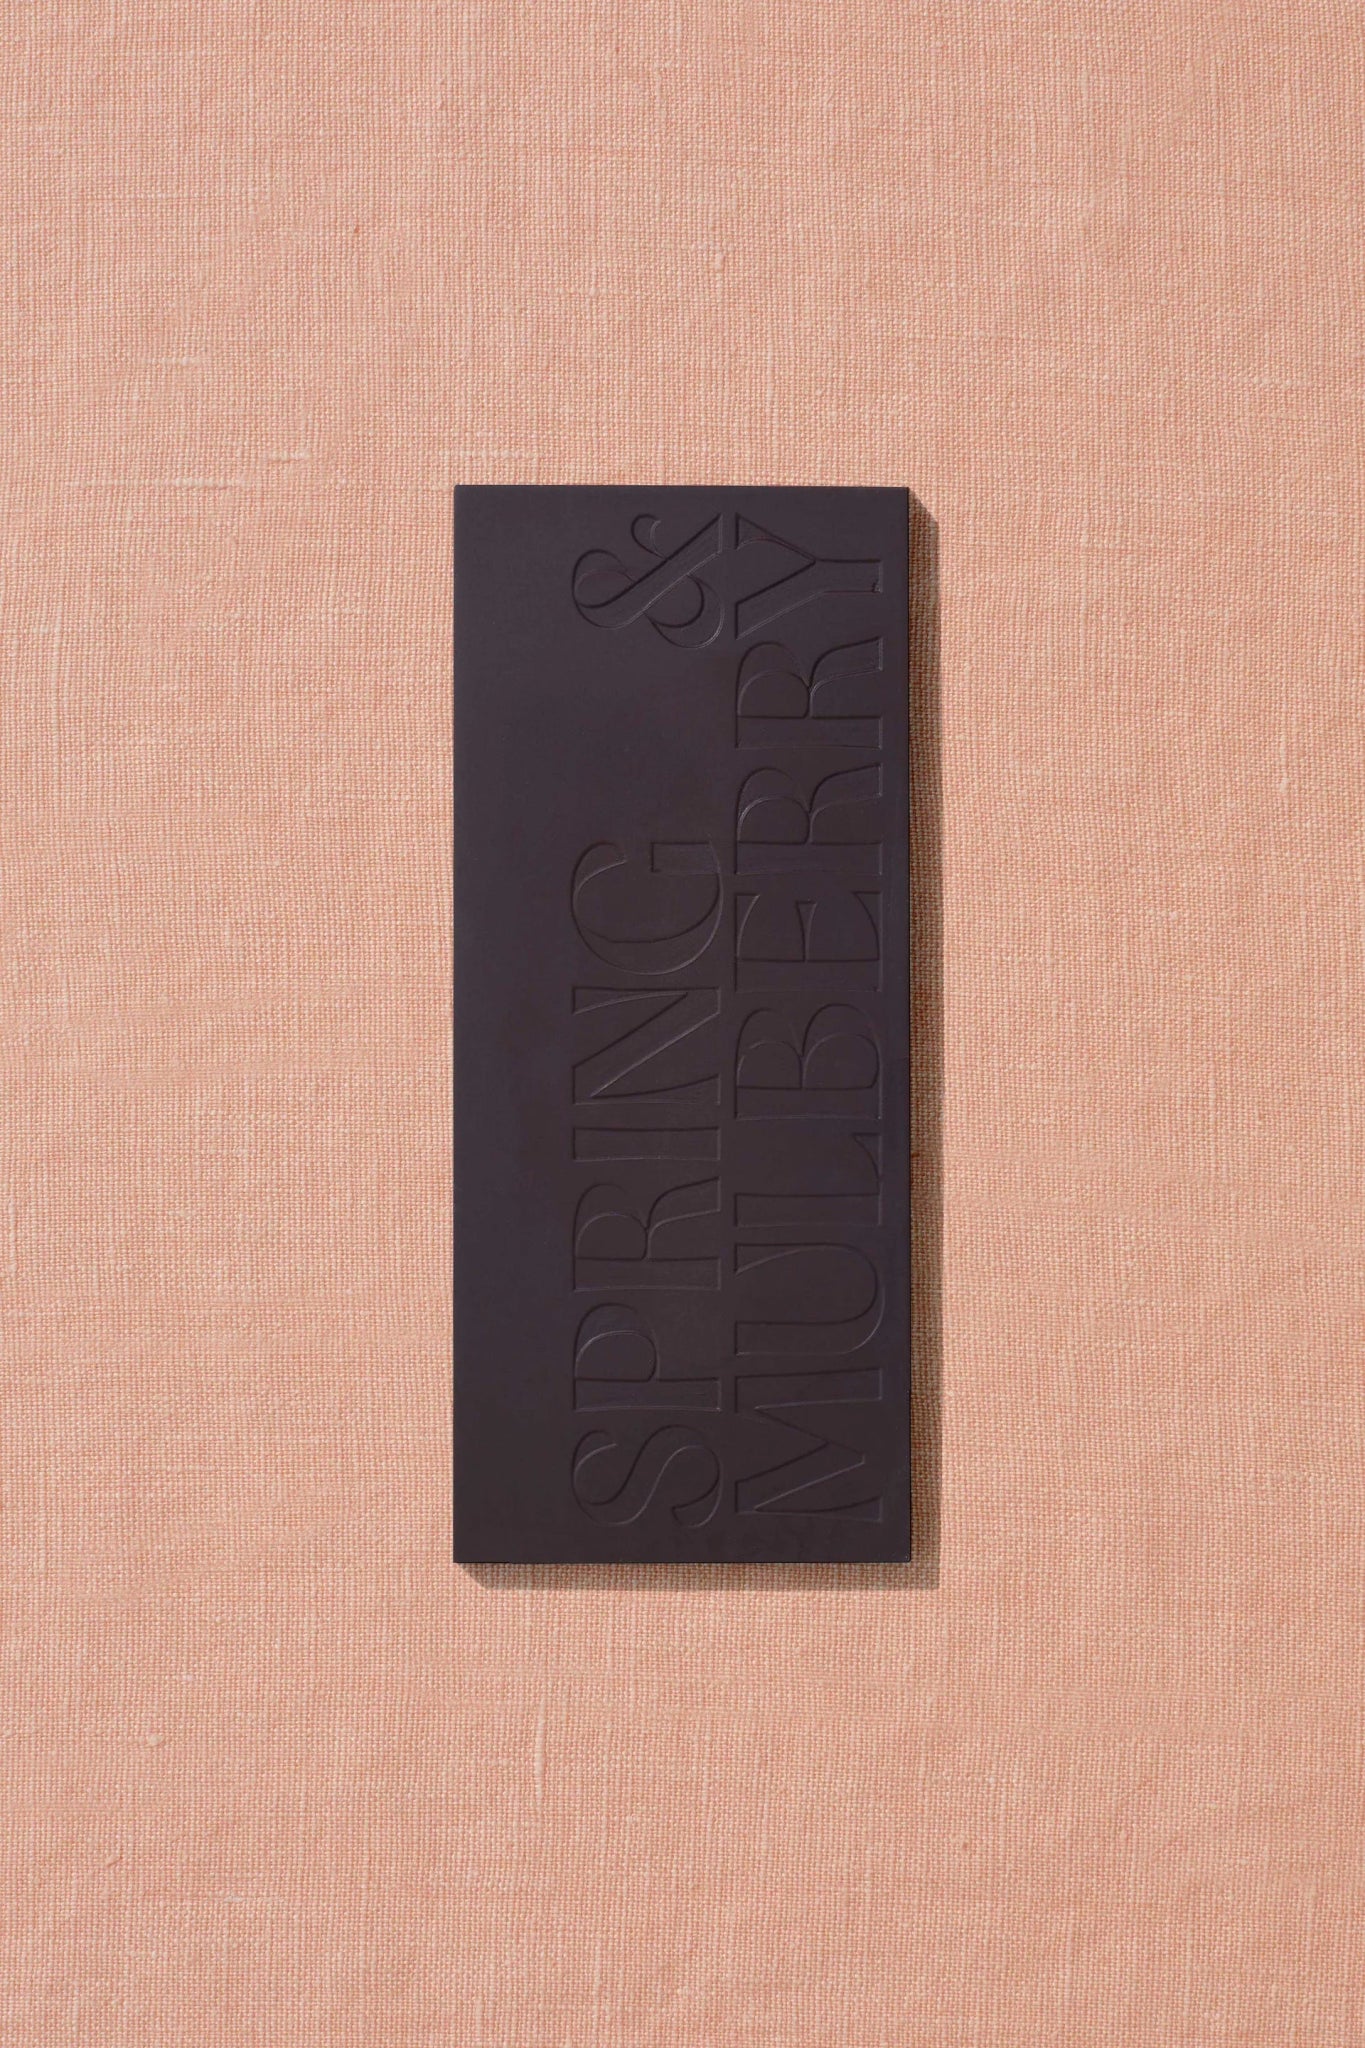 Spring & Mulberry Chocolate - Suhum Cacao Beans, Dates, Cacao Butter